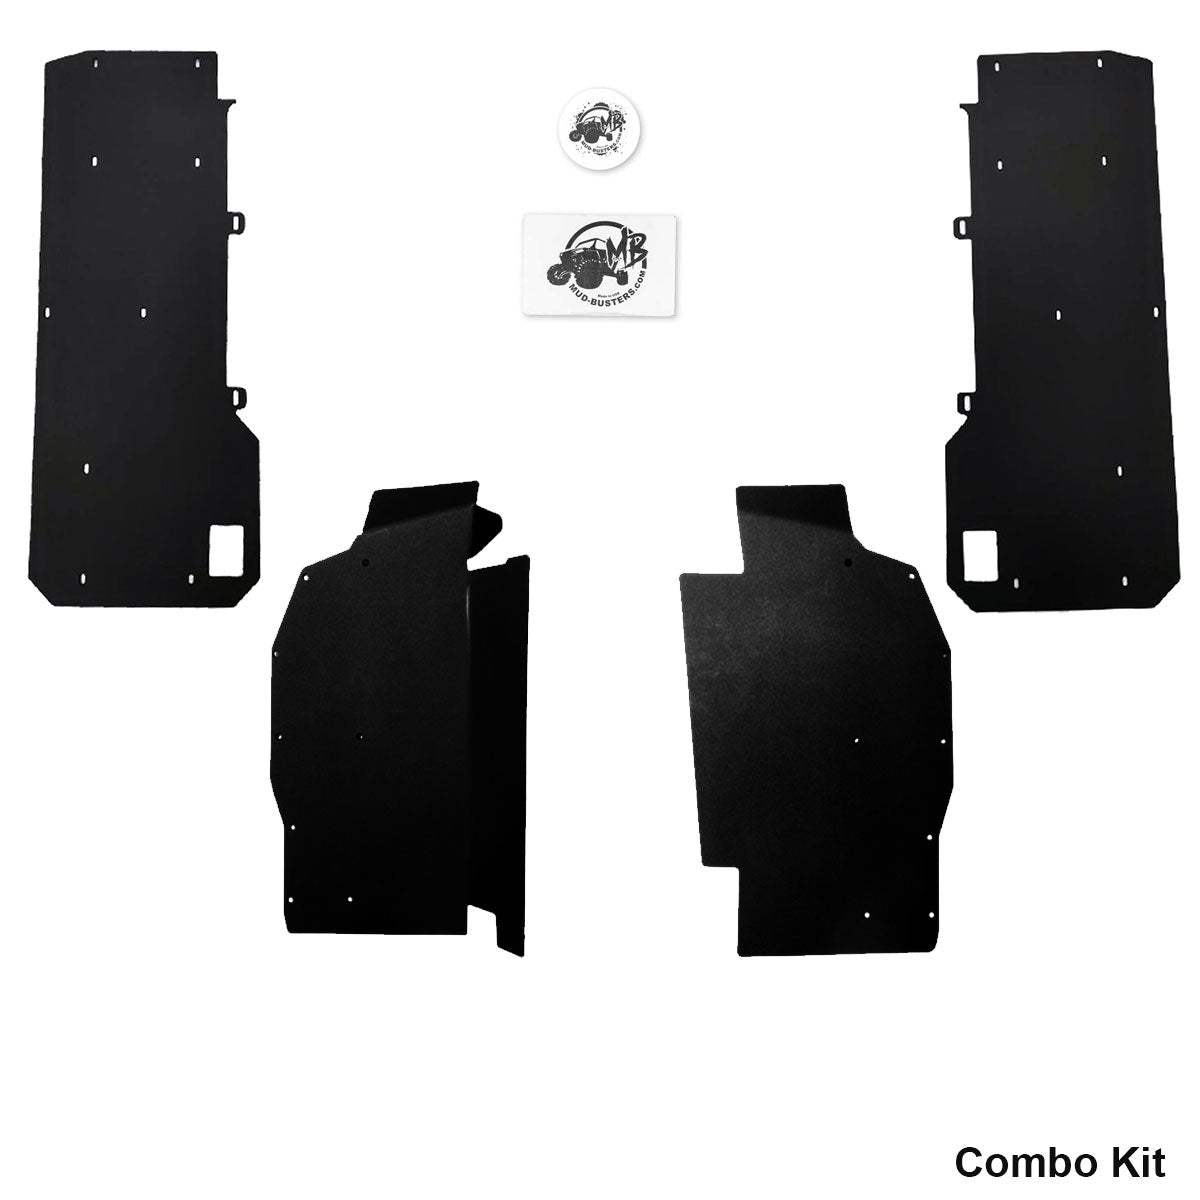 2016-2022 Can-Am Defender Mud Guards and Protection Panels